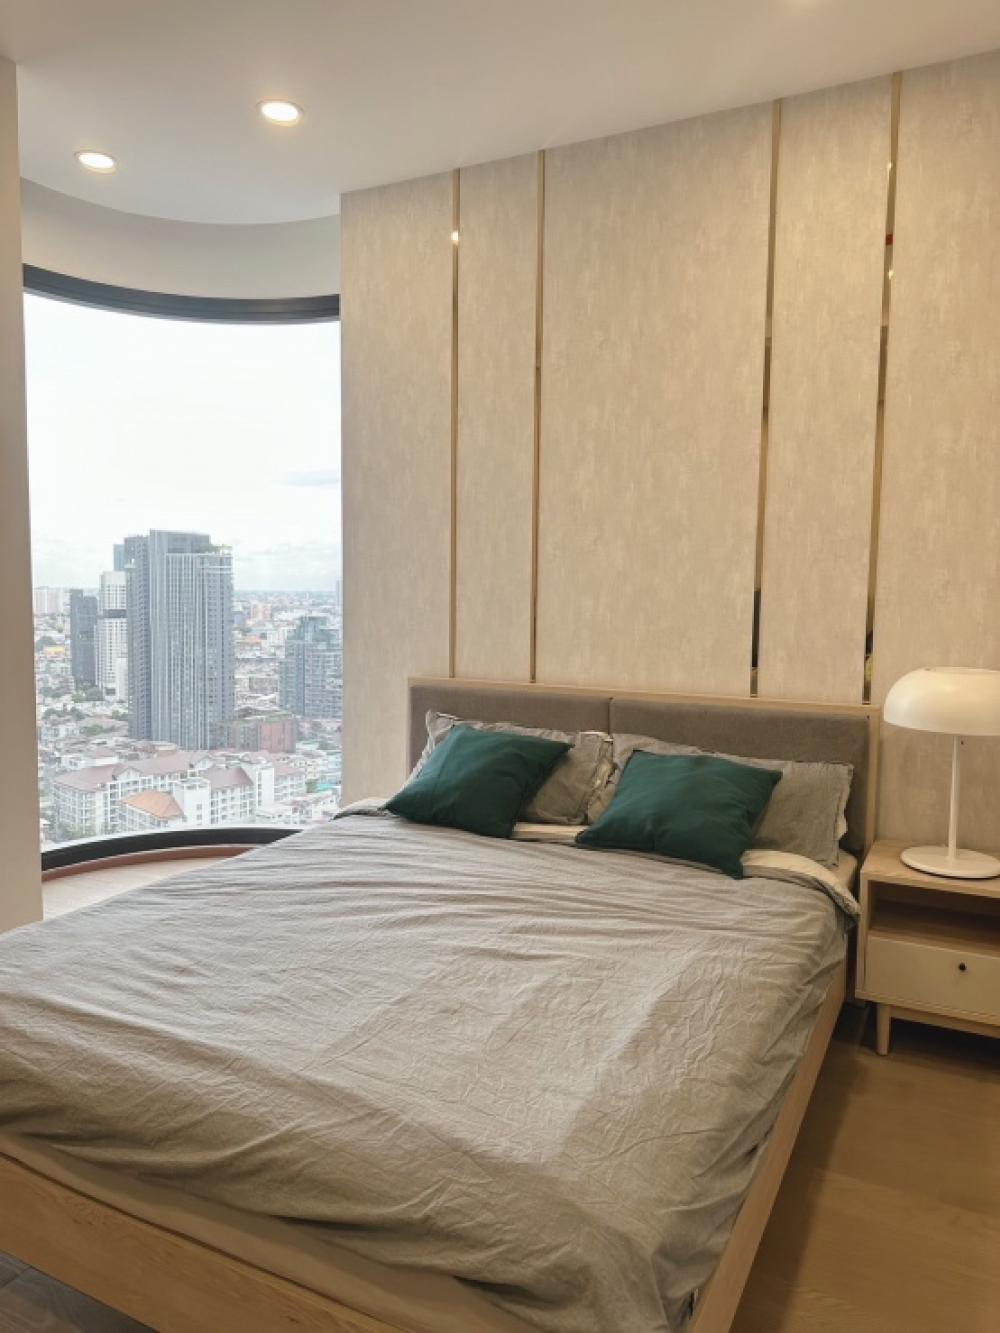 For RentCondoSiam Paragon ,Chulalongkorn,Samyan : 🔥Available Now🔥 Ashton Chula 1-1BR 31.4sqm, good view, high floor, complete electrical appliances 082-459-4297